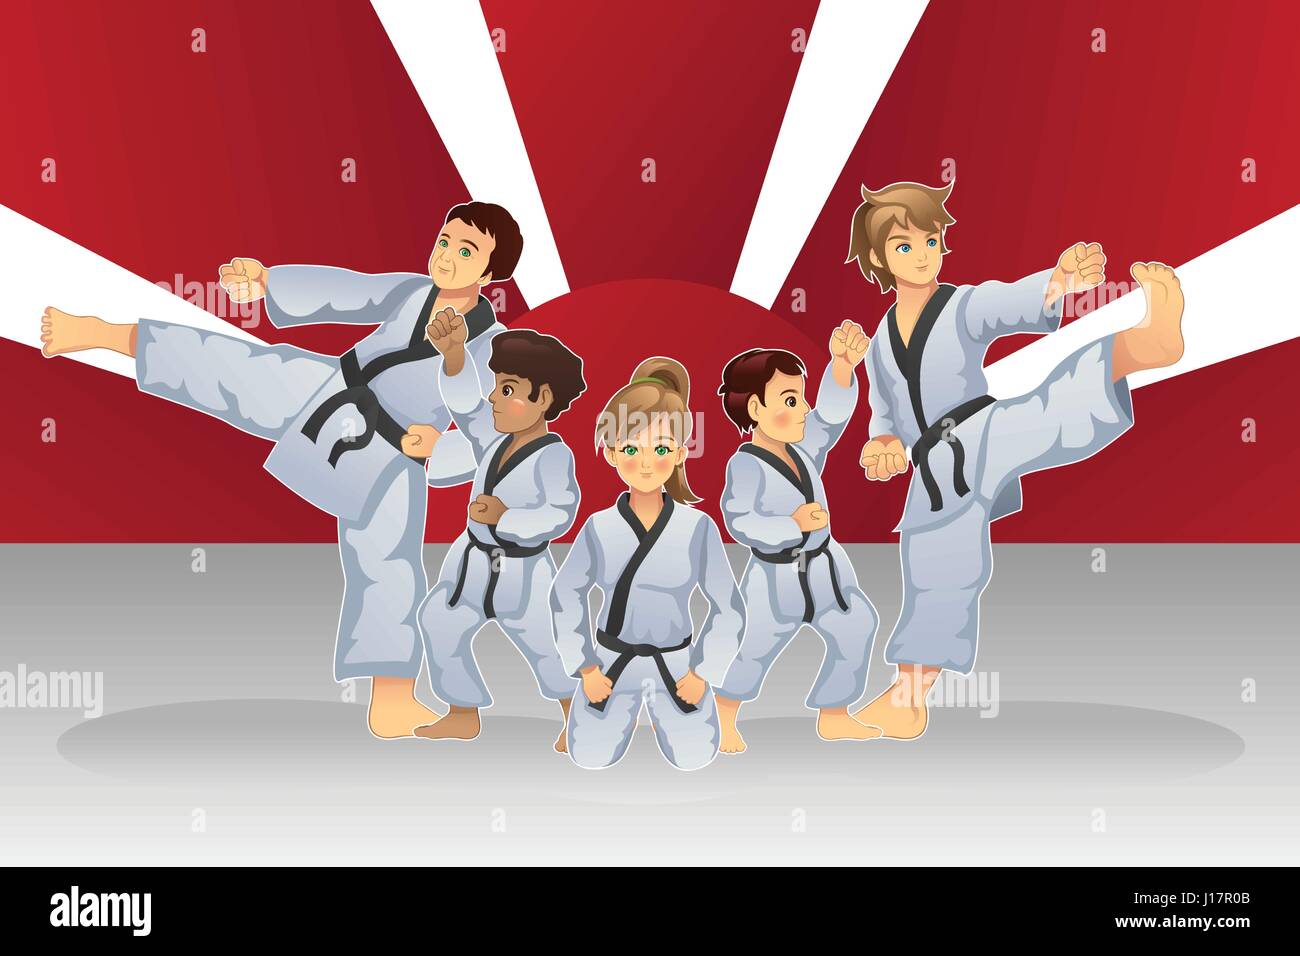 A vector illustration of martial art banner with kids practicing karate Stock Vector